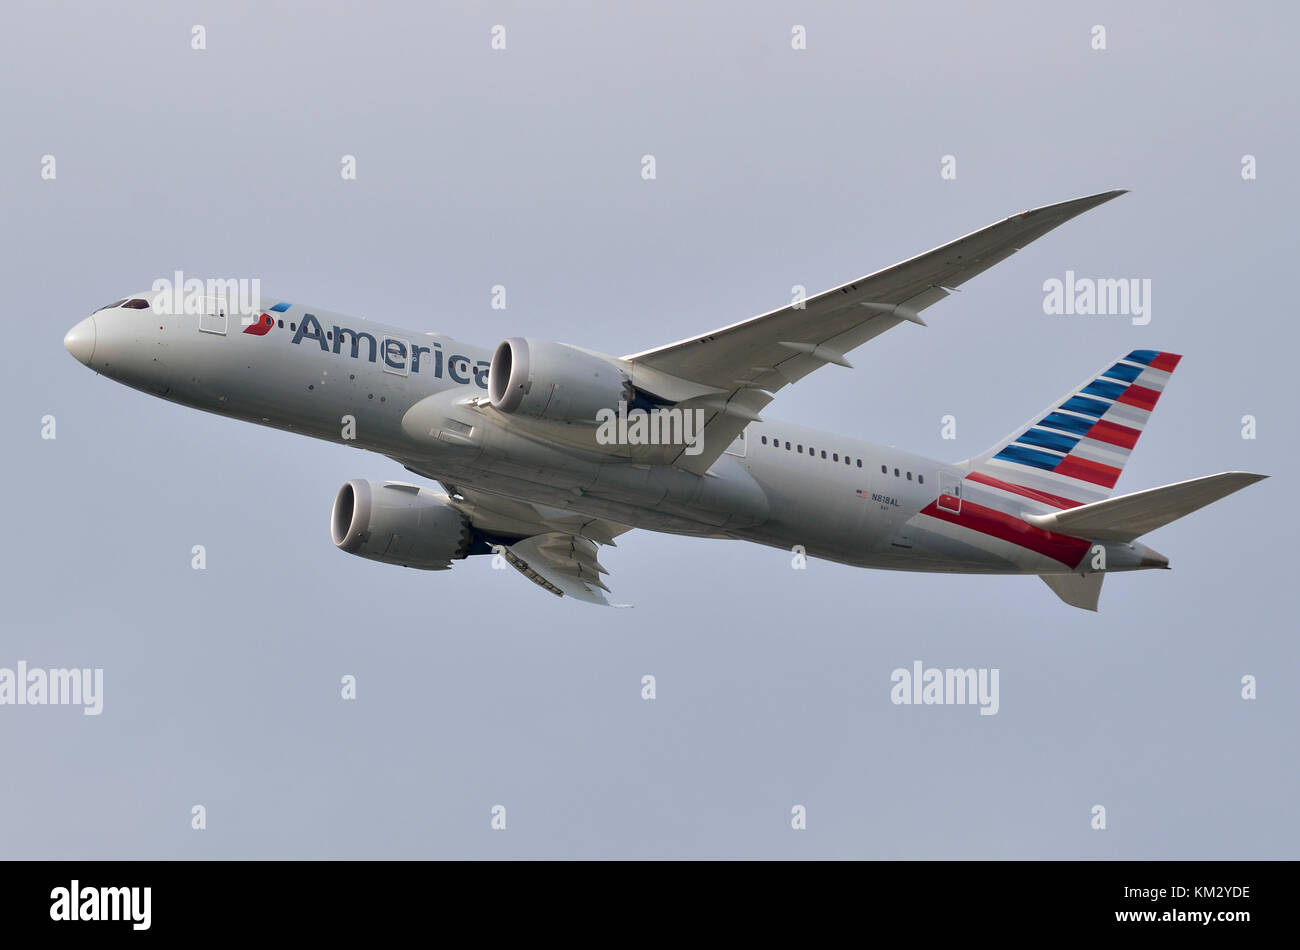 Boeing787-8, American Airlines, Heathrow Airport, UK. Boeing 787-8 N818AL is seen climbing out after take-off. Stock Photo